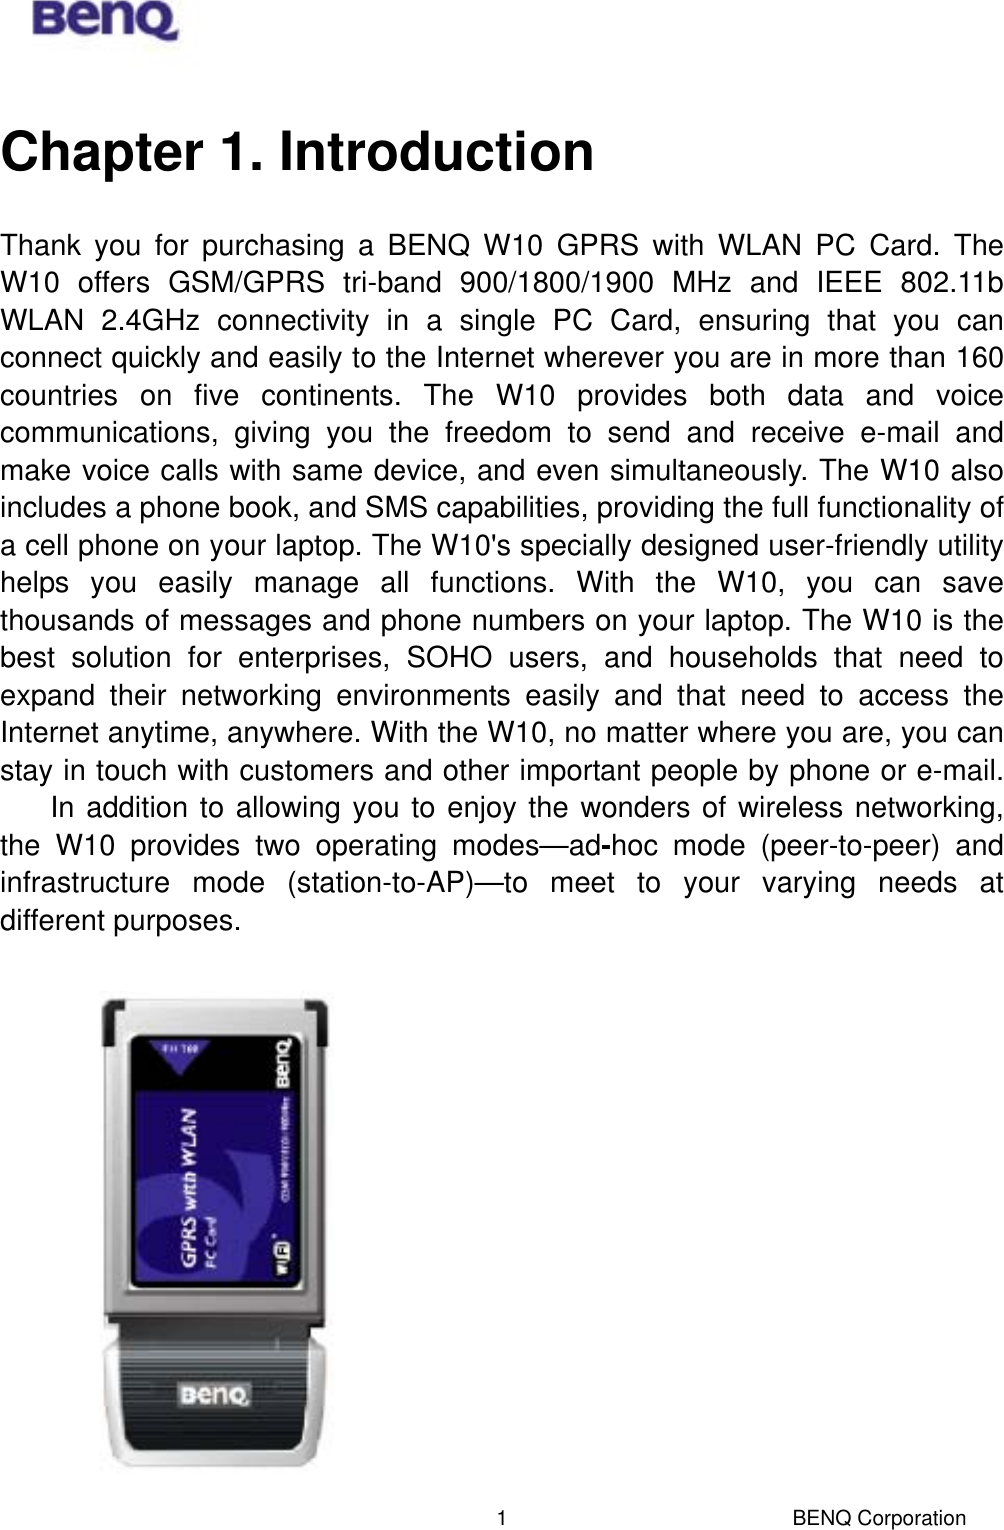  BENQ Corporation 1Chapter 1. Introduction Thank you for purchasing a BENQ W10 GPRS with WLAN PC Card. The W10 offers GSM/GPRS tri-band 900/1800/1900 MHz and IEEE 802.11b WLAN 2.4GHz connectivity in a single PC Card, ensuring that you can connect quickly and easily to the Internet wherever you are in more than 160 countries on five continents. The W10 provides both data and voice communications, giving you the freedom to send and receive e-mail and make voice calls with same device, and even simultaneously. The W10 also includes a phone book, and SMS capabilities, providing the full functionality of a cell phone on your laptop. The W10&apos;s specially designed user-friendly utility helps you easily manage all functions. With the W10, you can save thousands of messages and phone numbers on your laptop. The W10 is the best solution for enterprises, SOHO users, and households that need to expand their networking environments easily and that need to access the Internet anytime, anywhere. With the W10, no matter where you are, you can stay in touch with customers and other important people by phone or e-mail.  In addition to allowing you to enjoy the wonders of wireless networking, the W10 provides two operating modes—ad-hoc mode (peer-to-peer) and infrastructure mode (station-to-AP)—to meet to your varying needs at different purposes.   